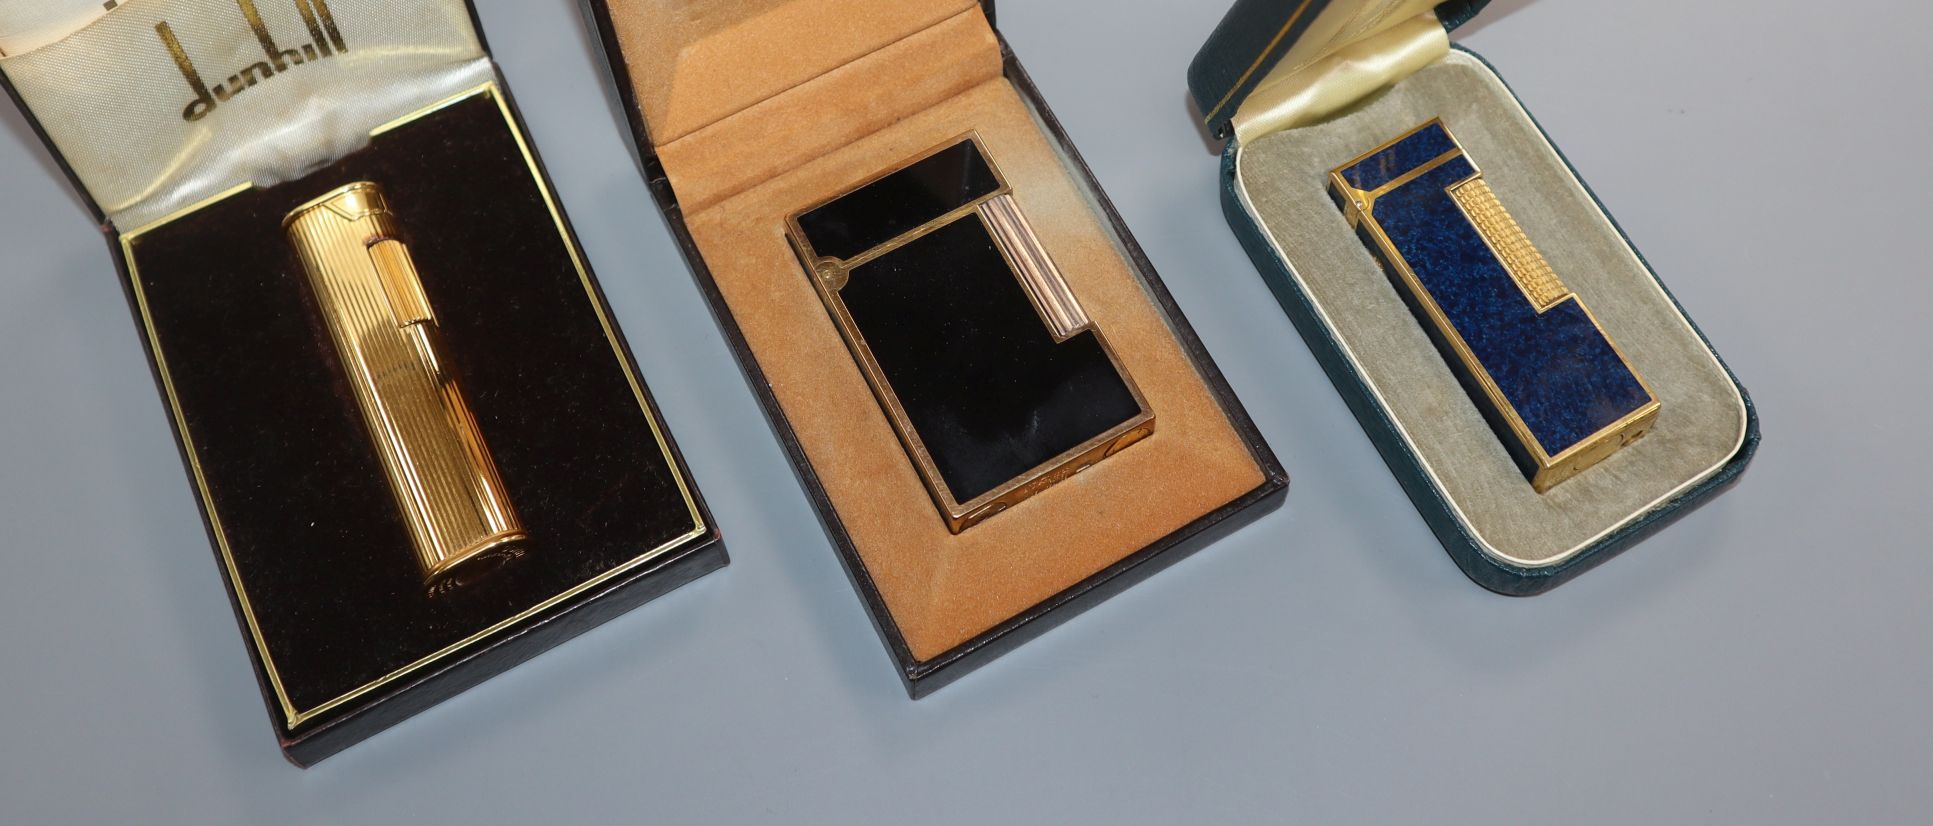 Two Dunhill lighters and a Dupont lighter, all cased